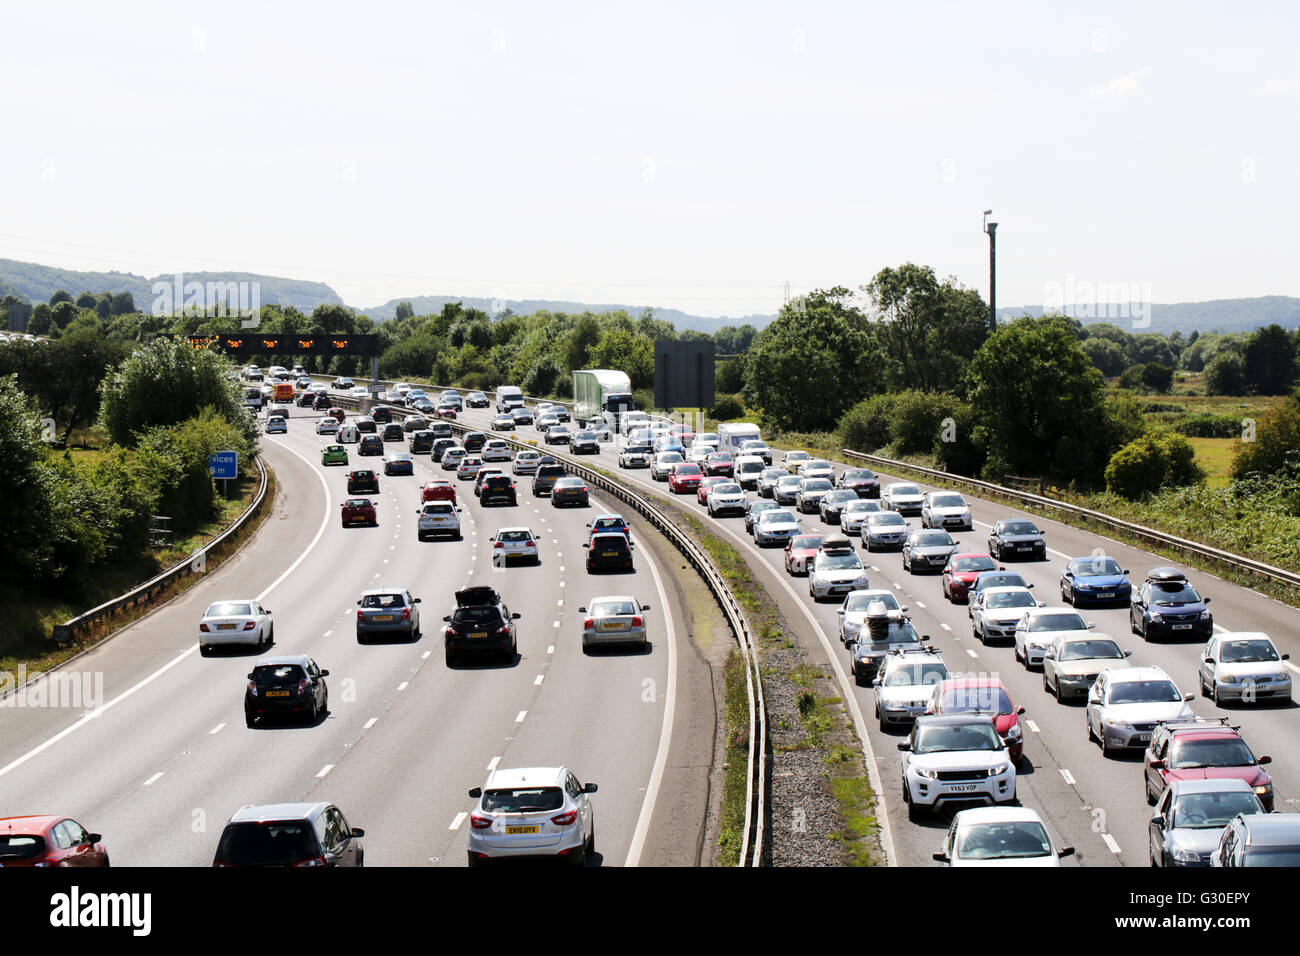 Heavy road traffic on a busy congested motorway Stock Photo